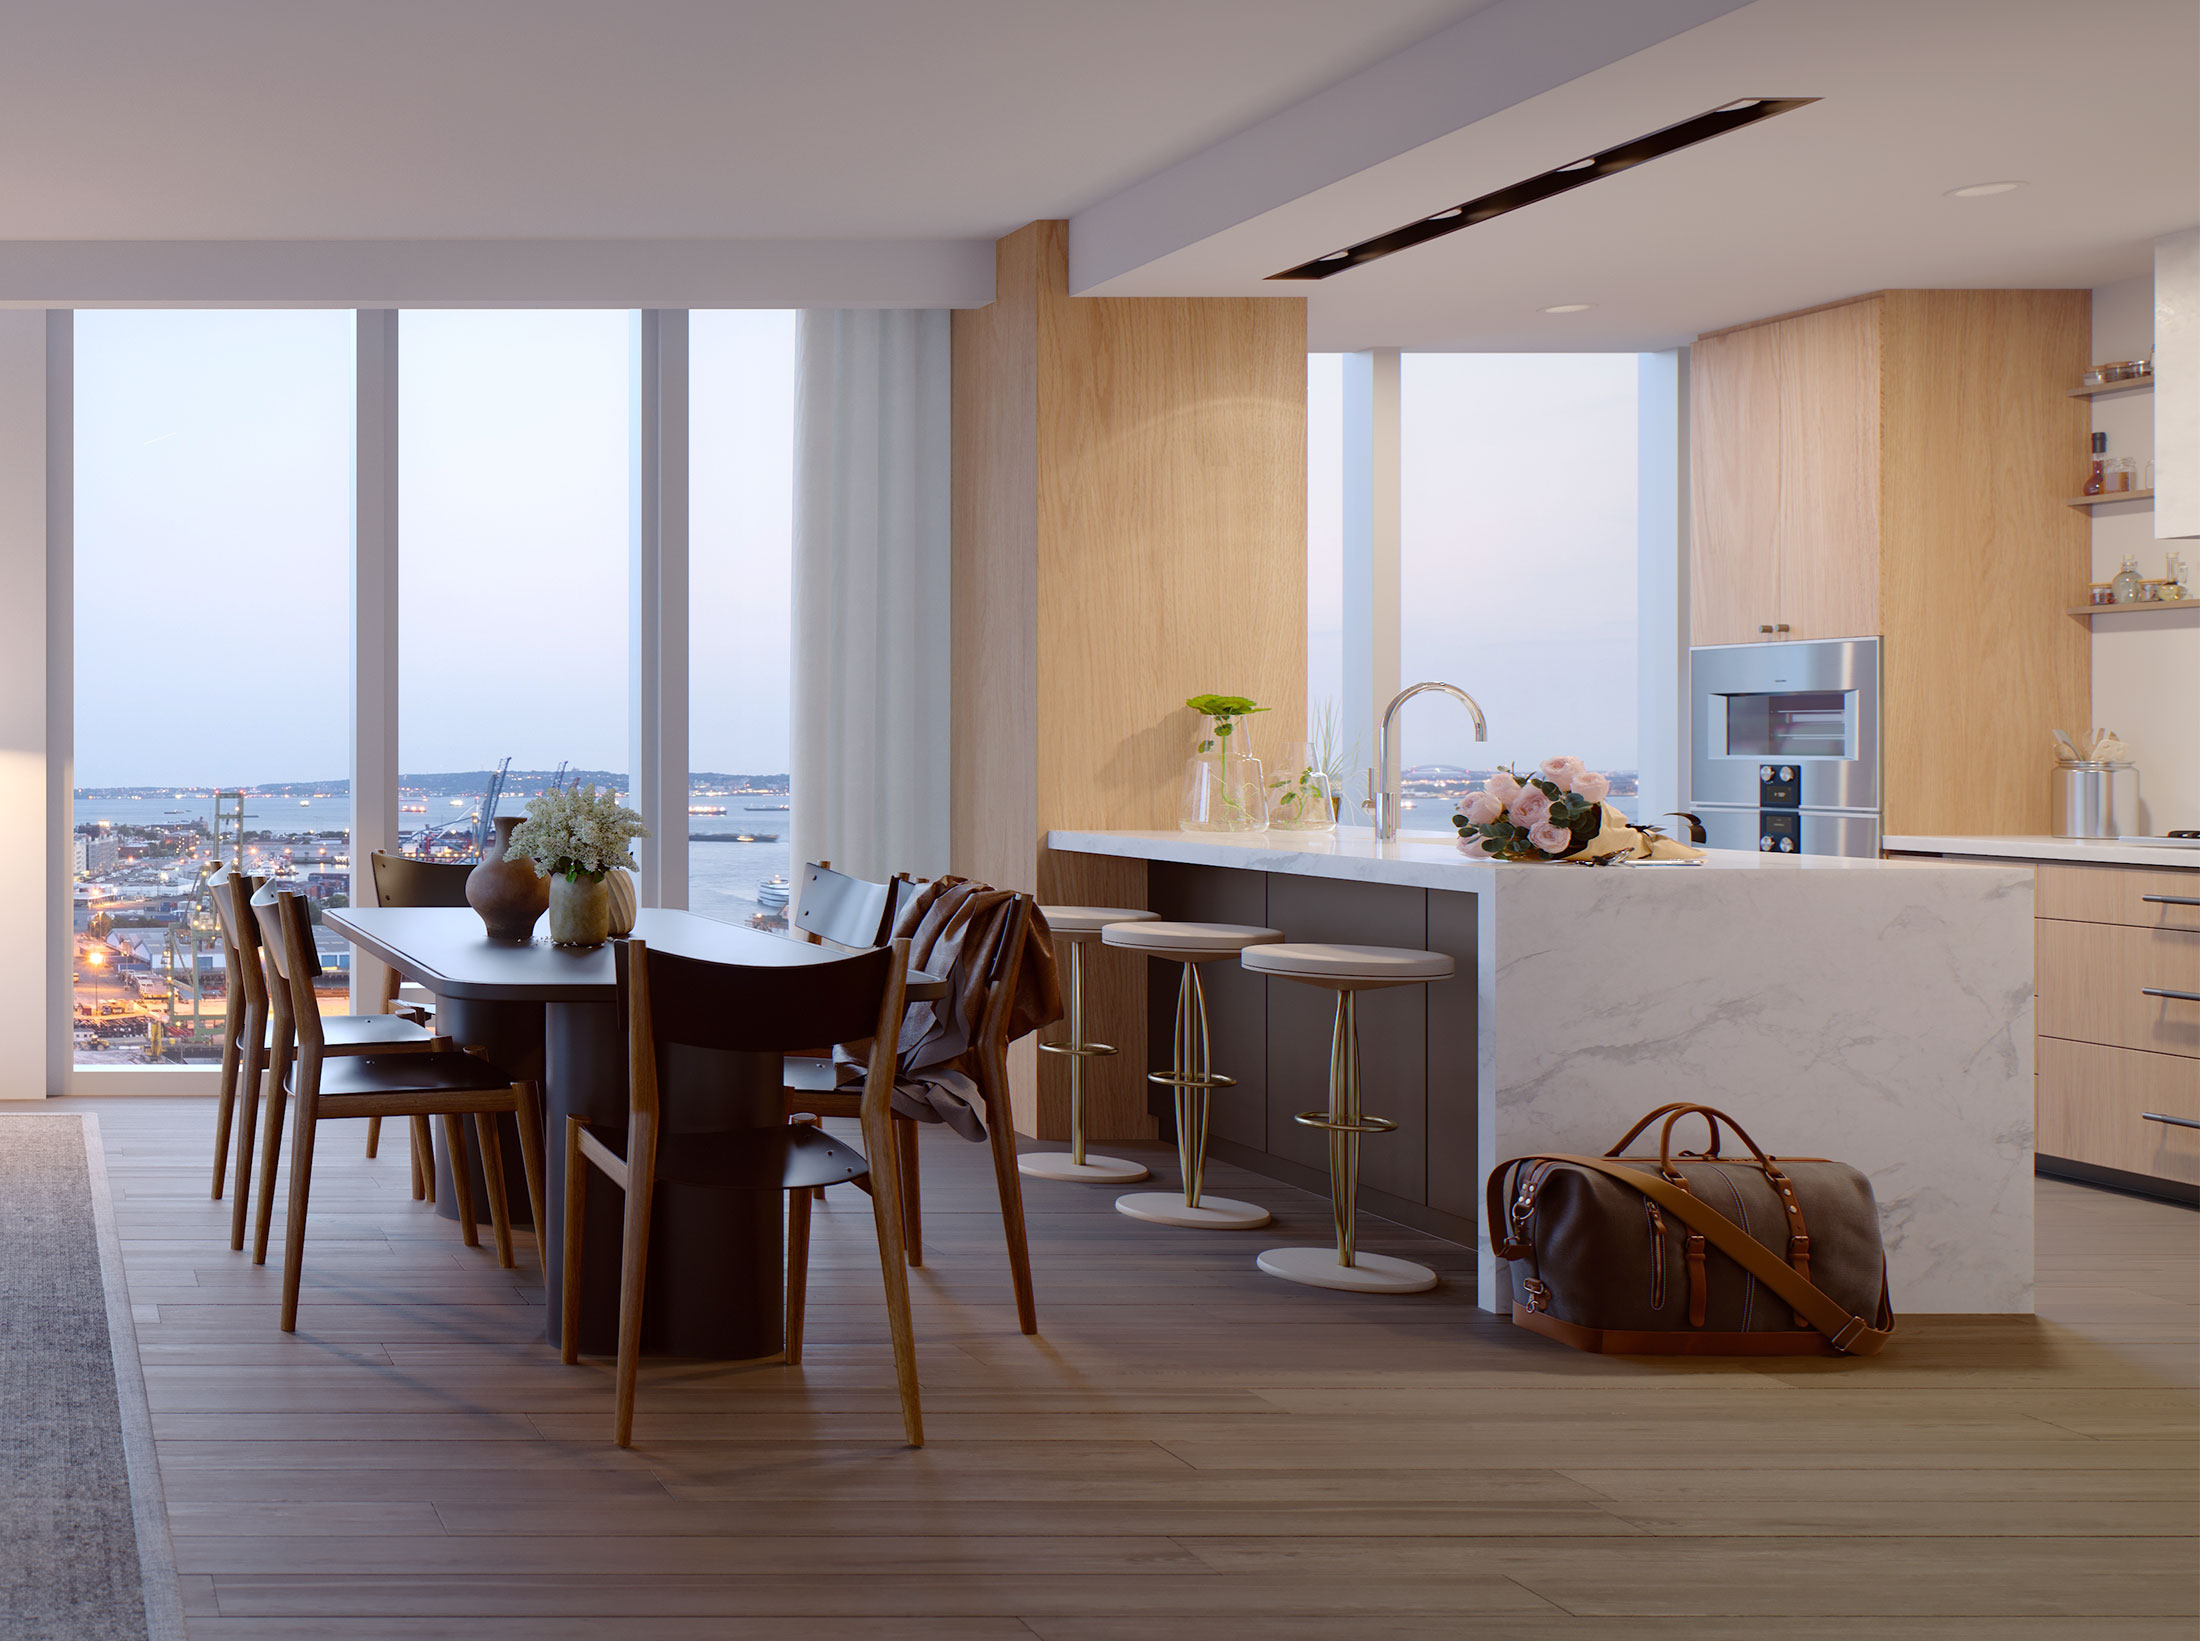 Architectural Rendering of the interior of the The Quay Tower project located in Brooklyn Heights, New York